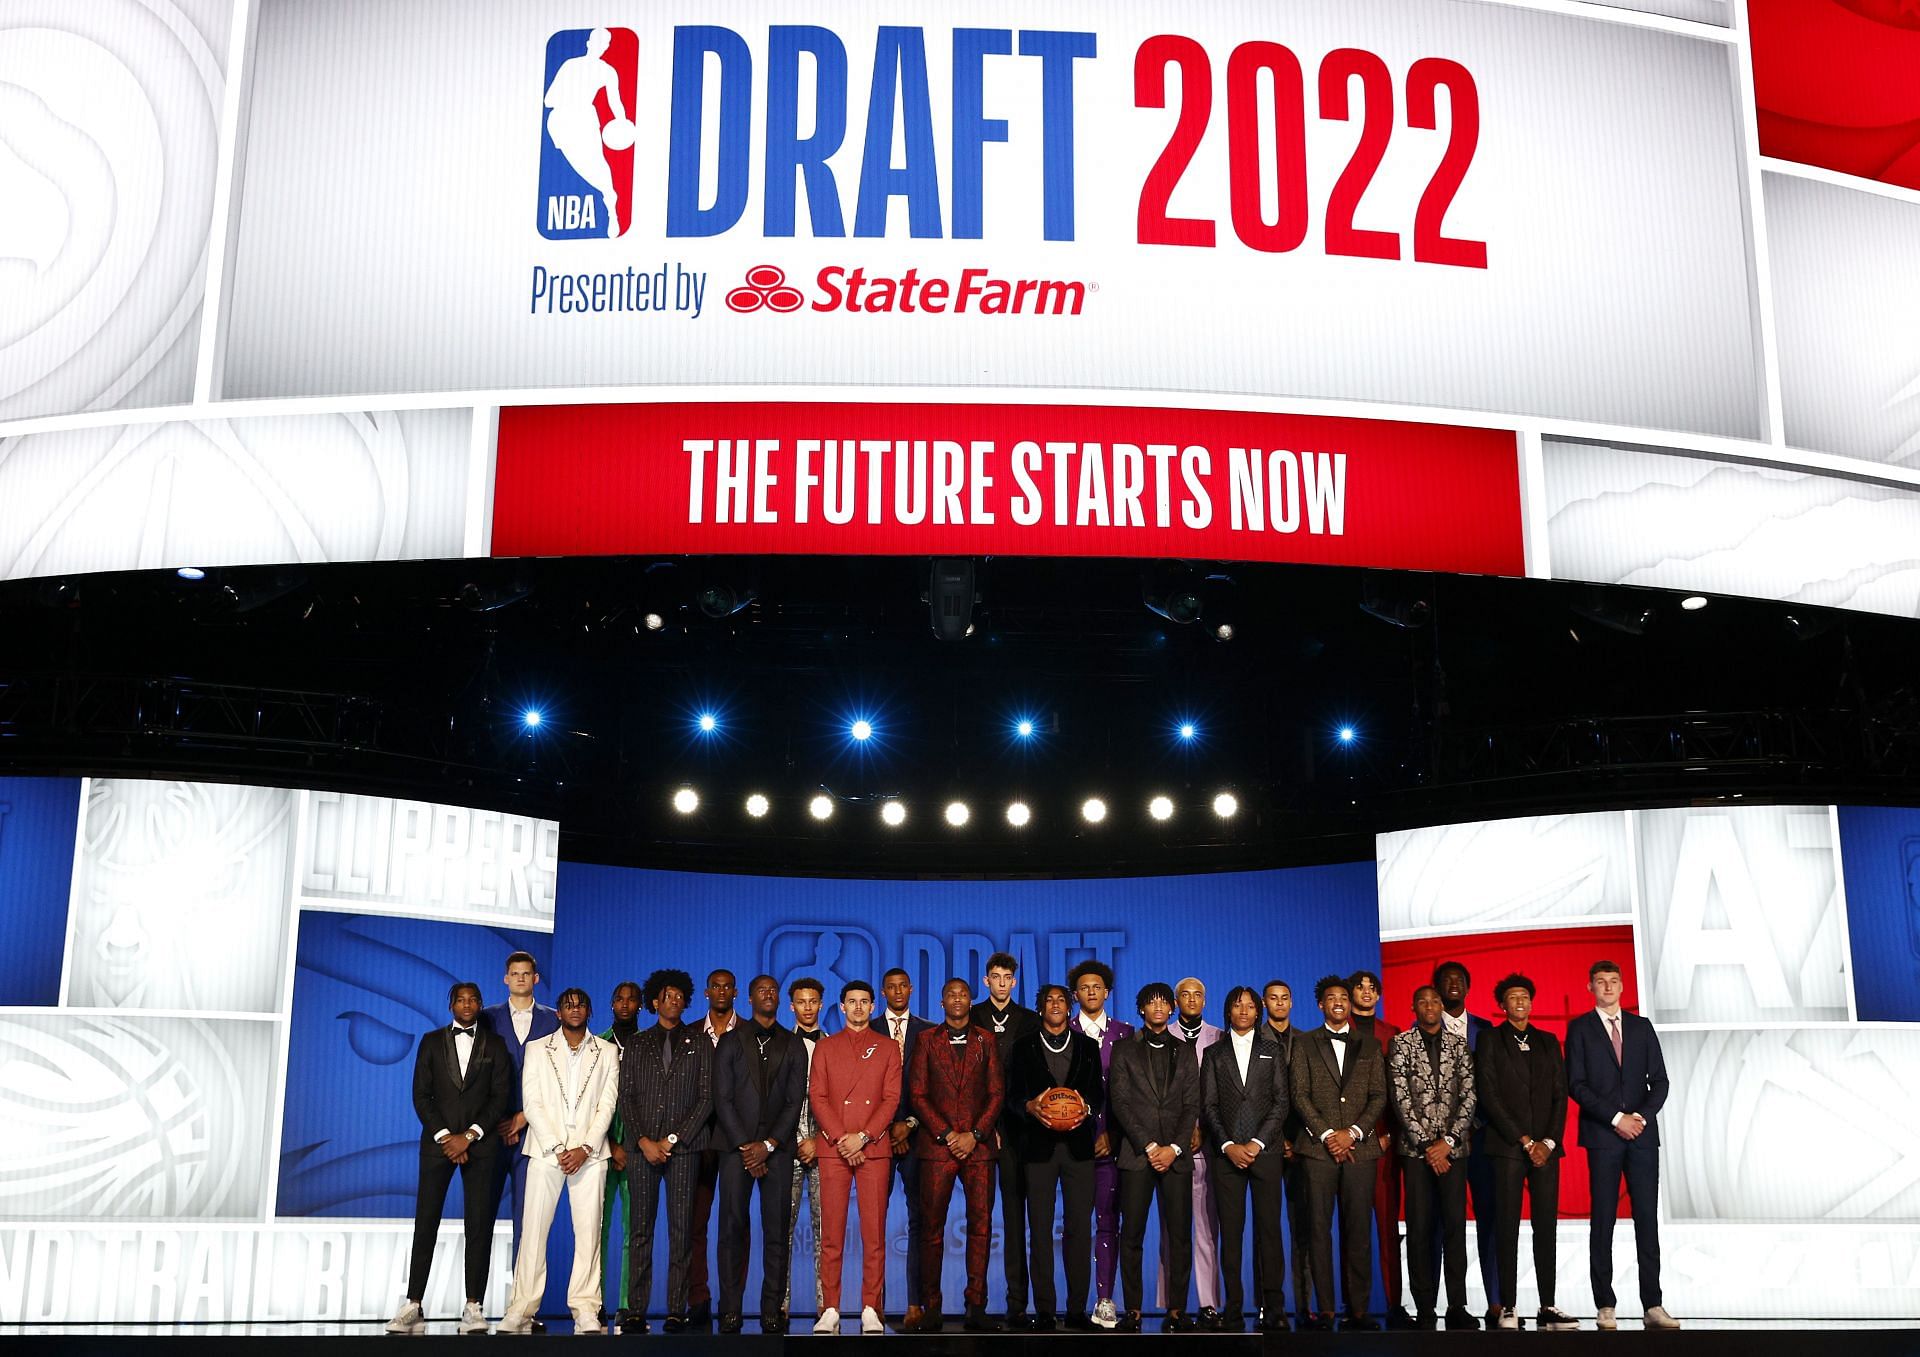 Nba Draft Night 2022 (Updated for 2023)